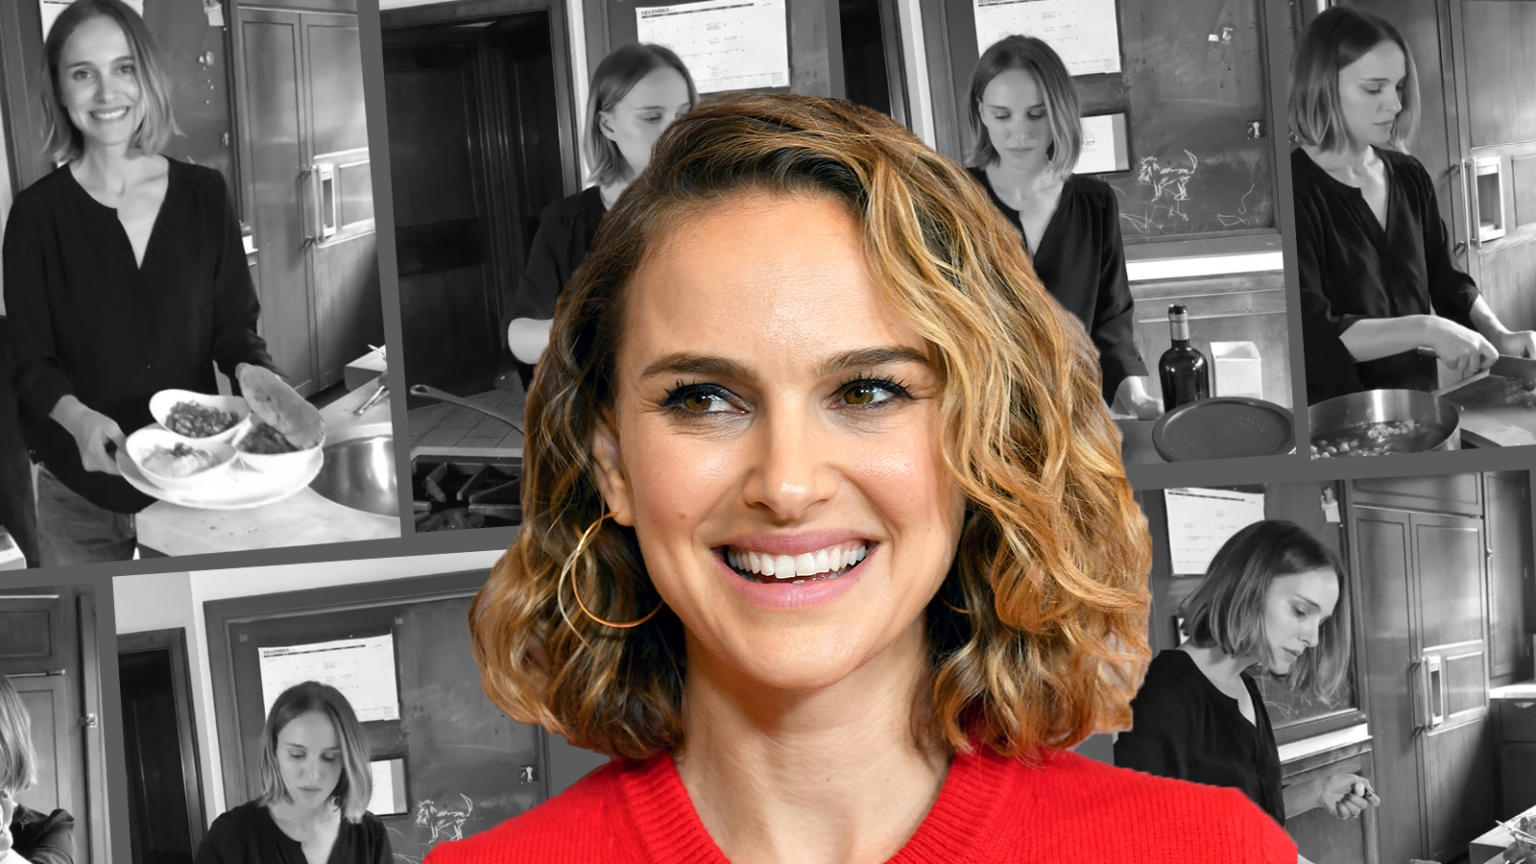 Natalie Portman Made a Vegan Israeli Breakfast and It Was Perfect | The